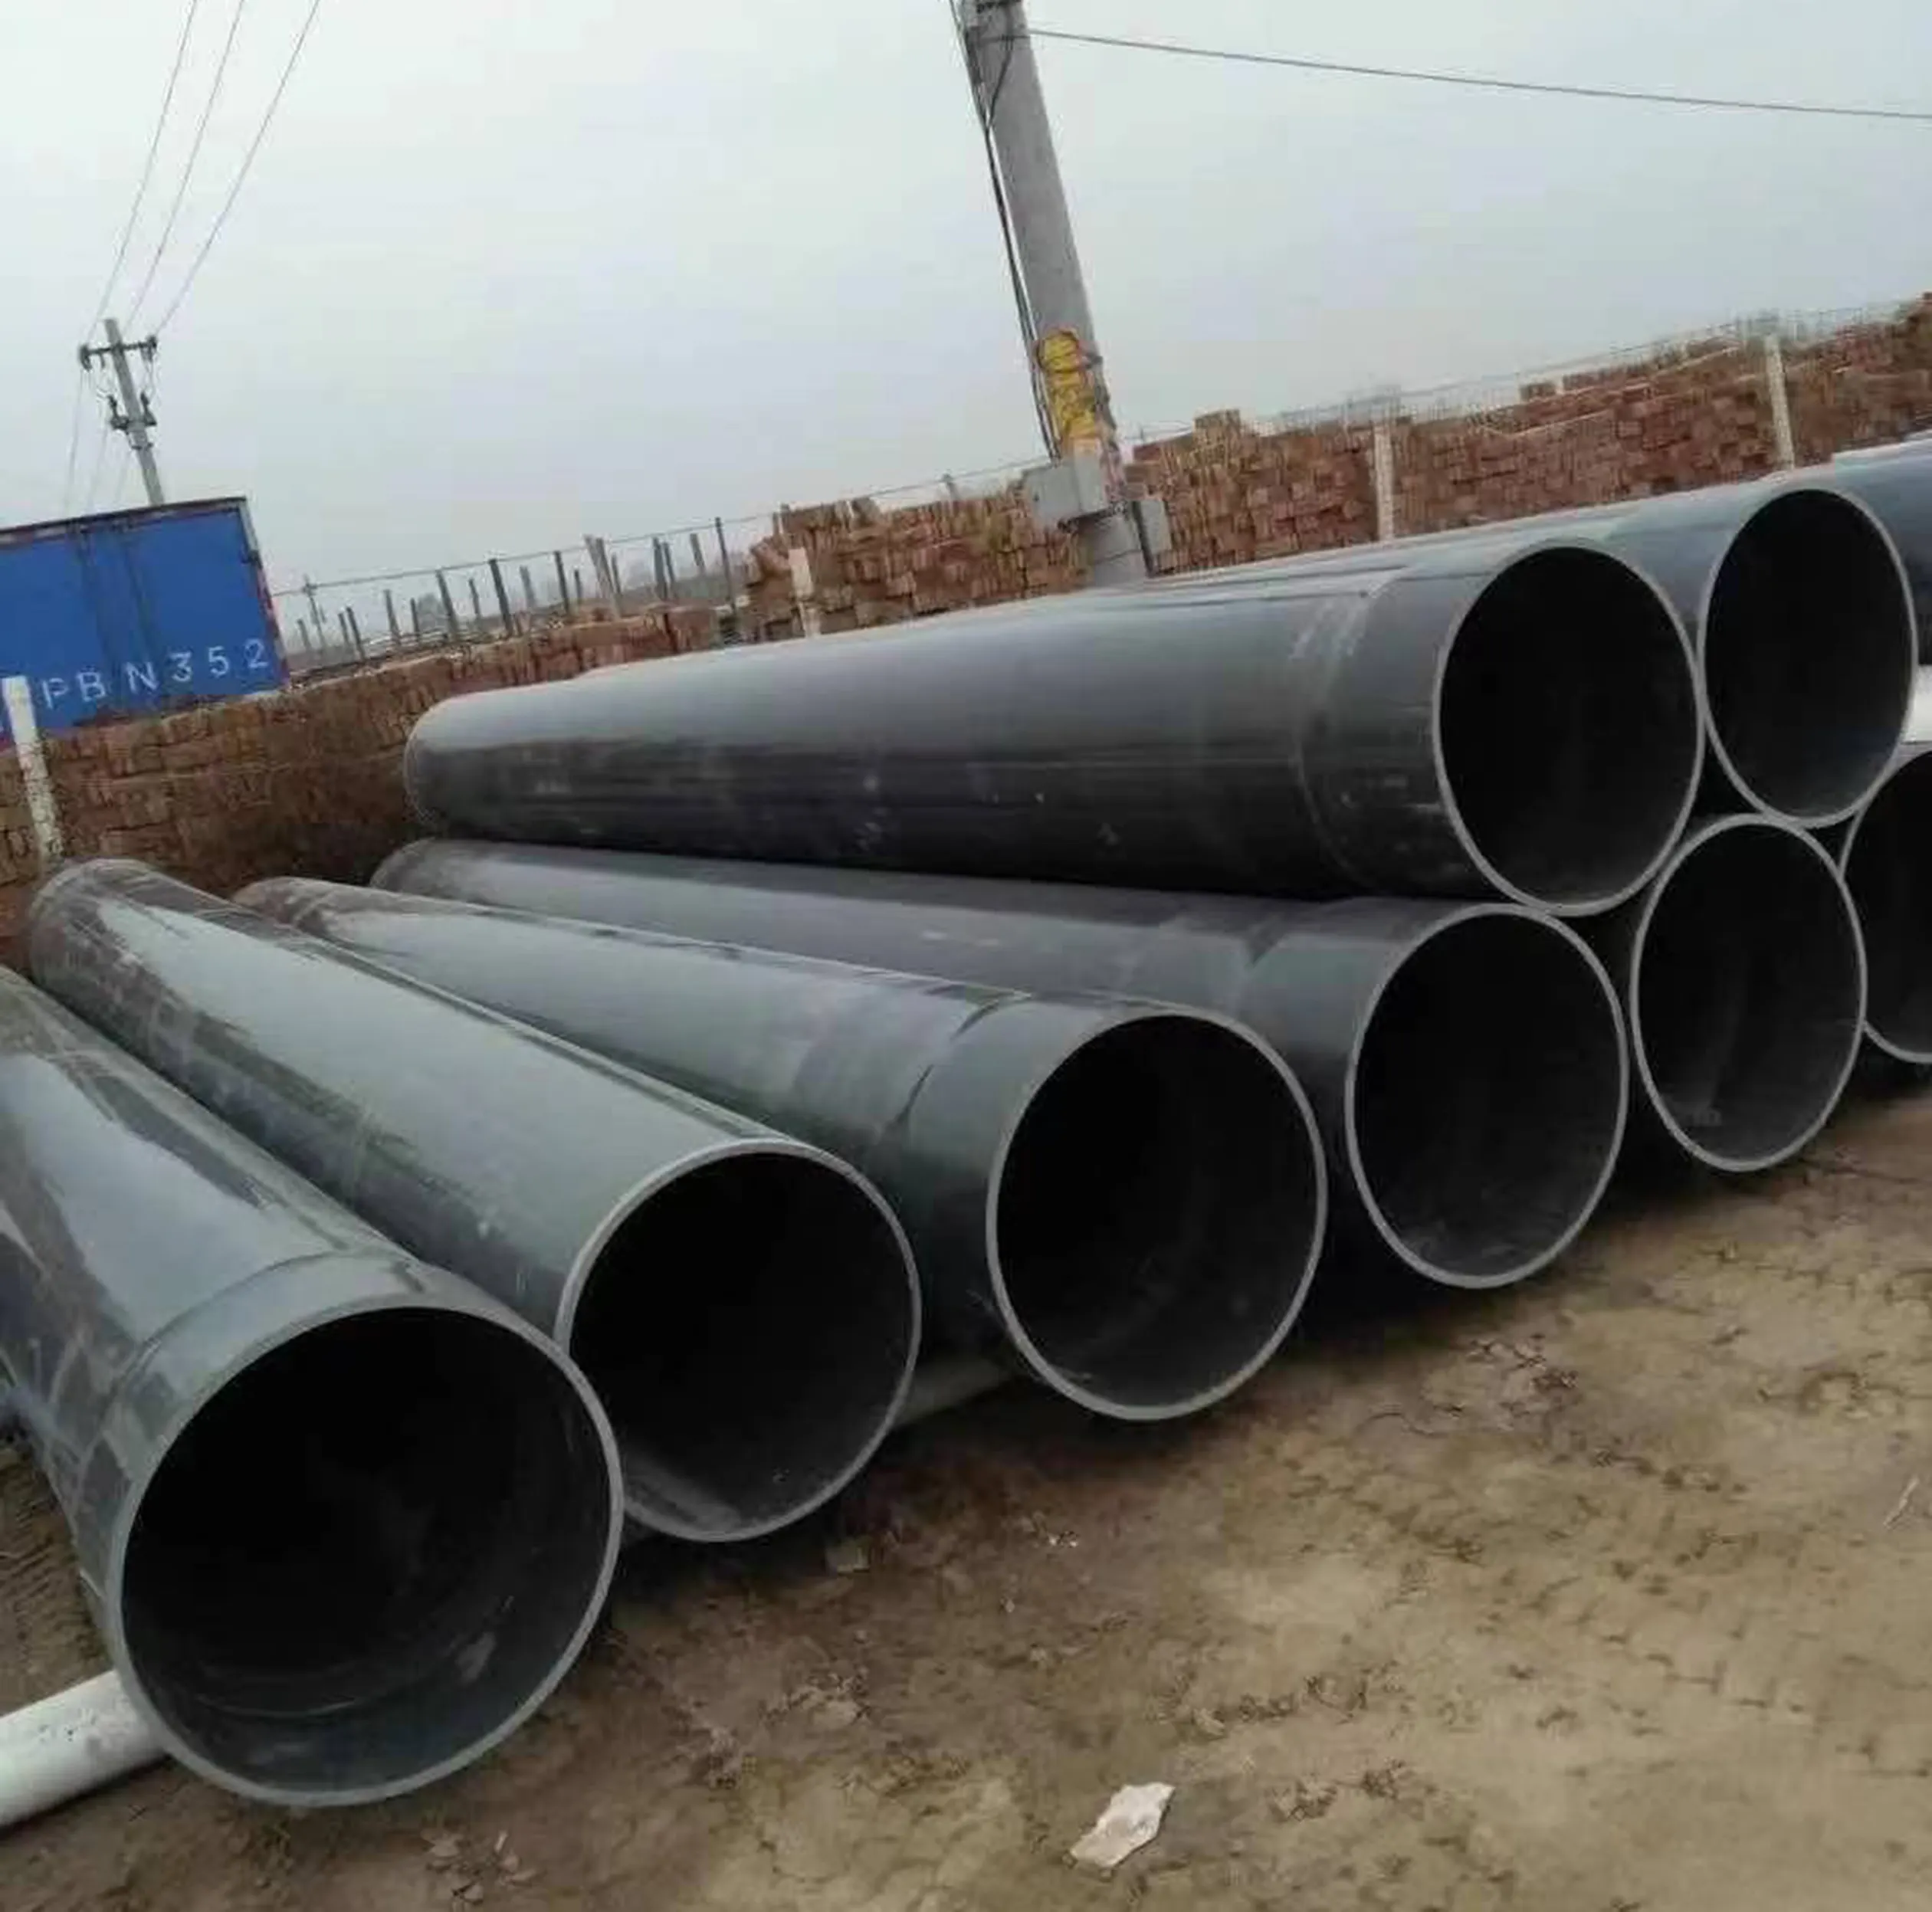 pvc 6 inch 8 inch 10 inch 12 inch upvc water plastic pipe for agricultural irrigation drain pvc pipe prices